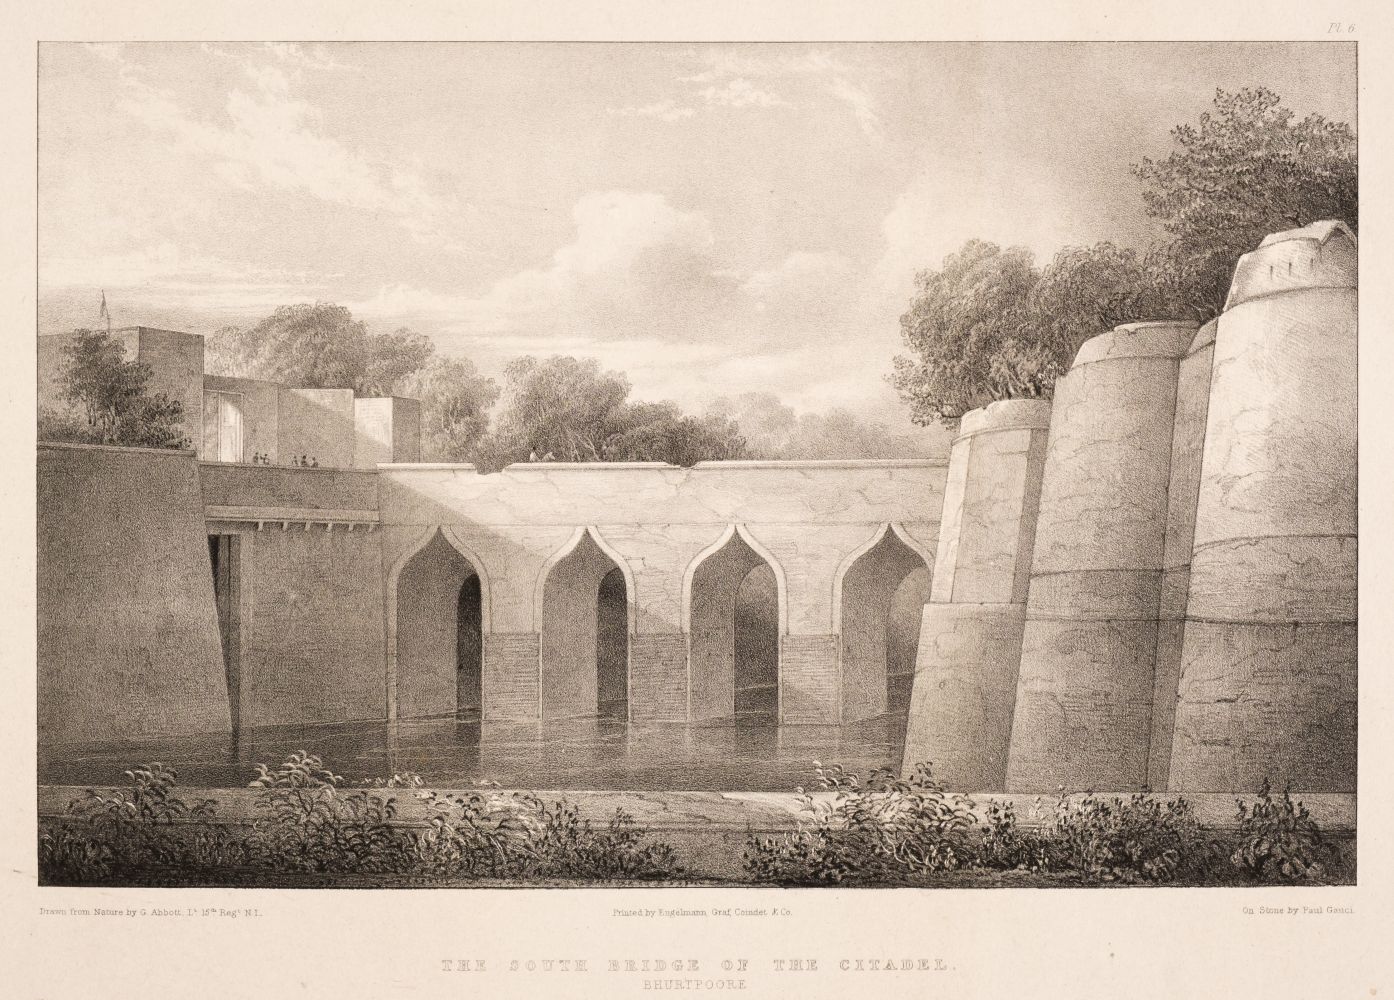 Abbott (George). Views of the Forts of Bhurtpoore & Weire, 1827